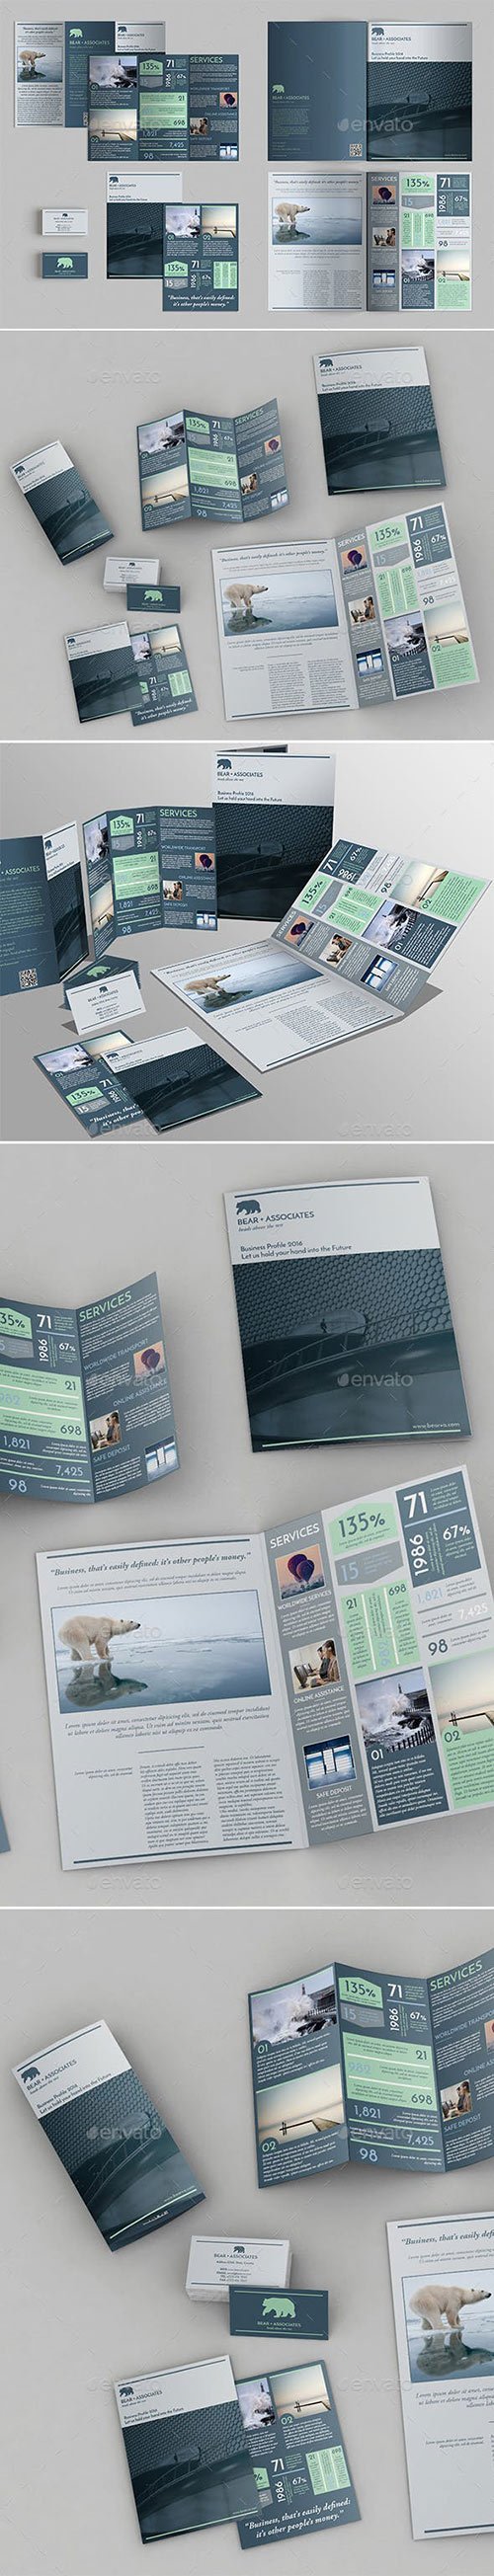 Set of Brochures Stationery Templates 23140515